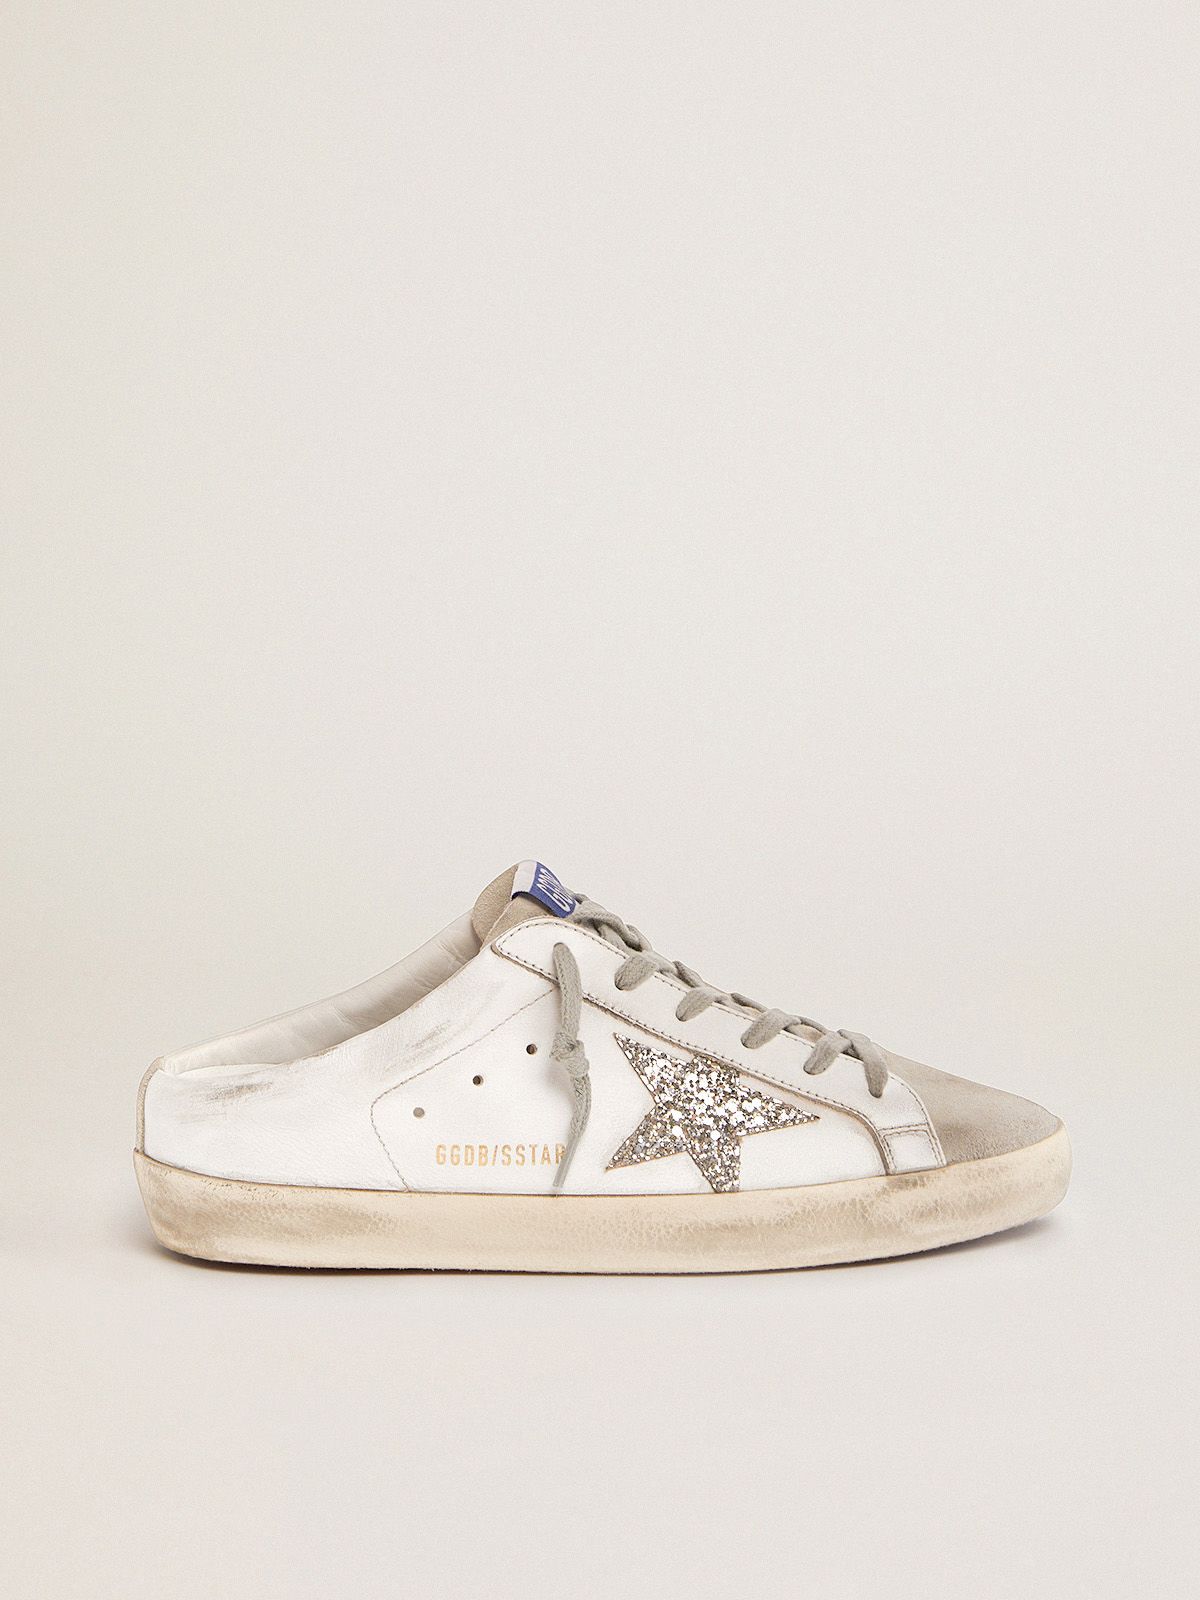 golden goose white and in Super-Star Sabots silver glitter gray leather suede star with